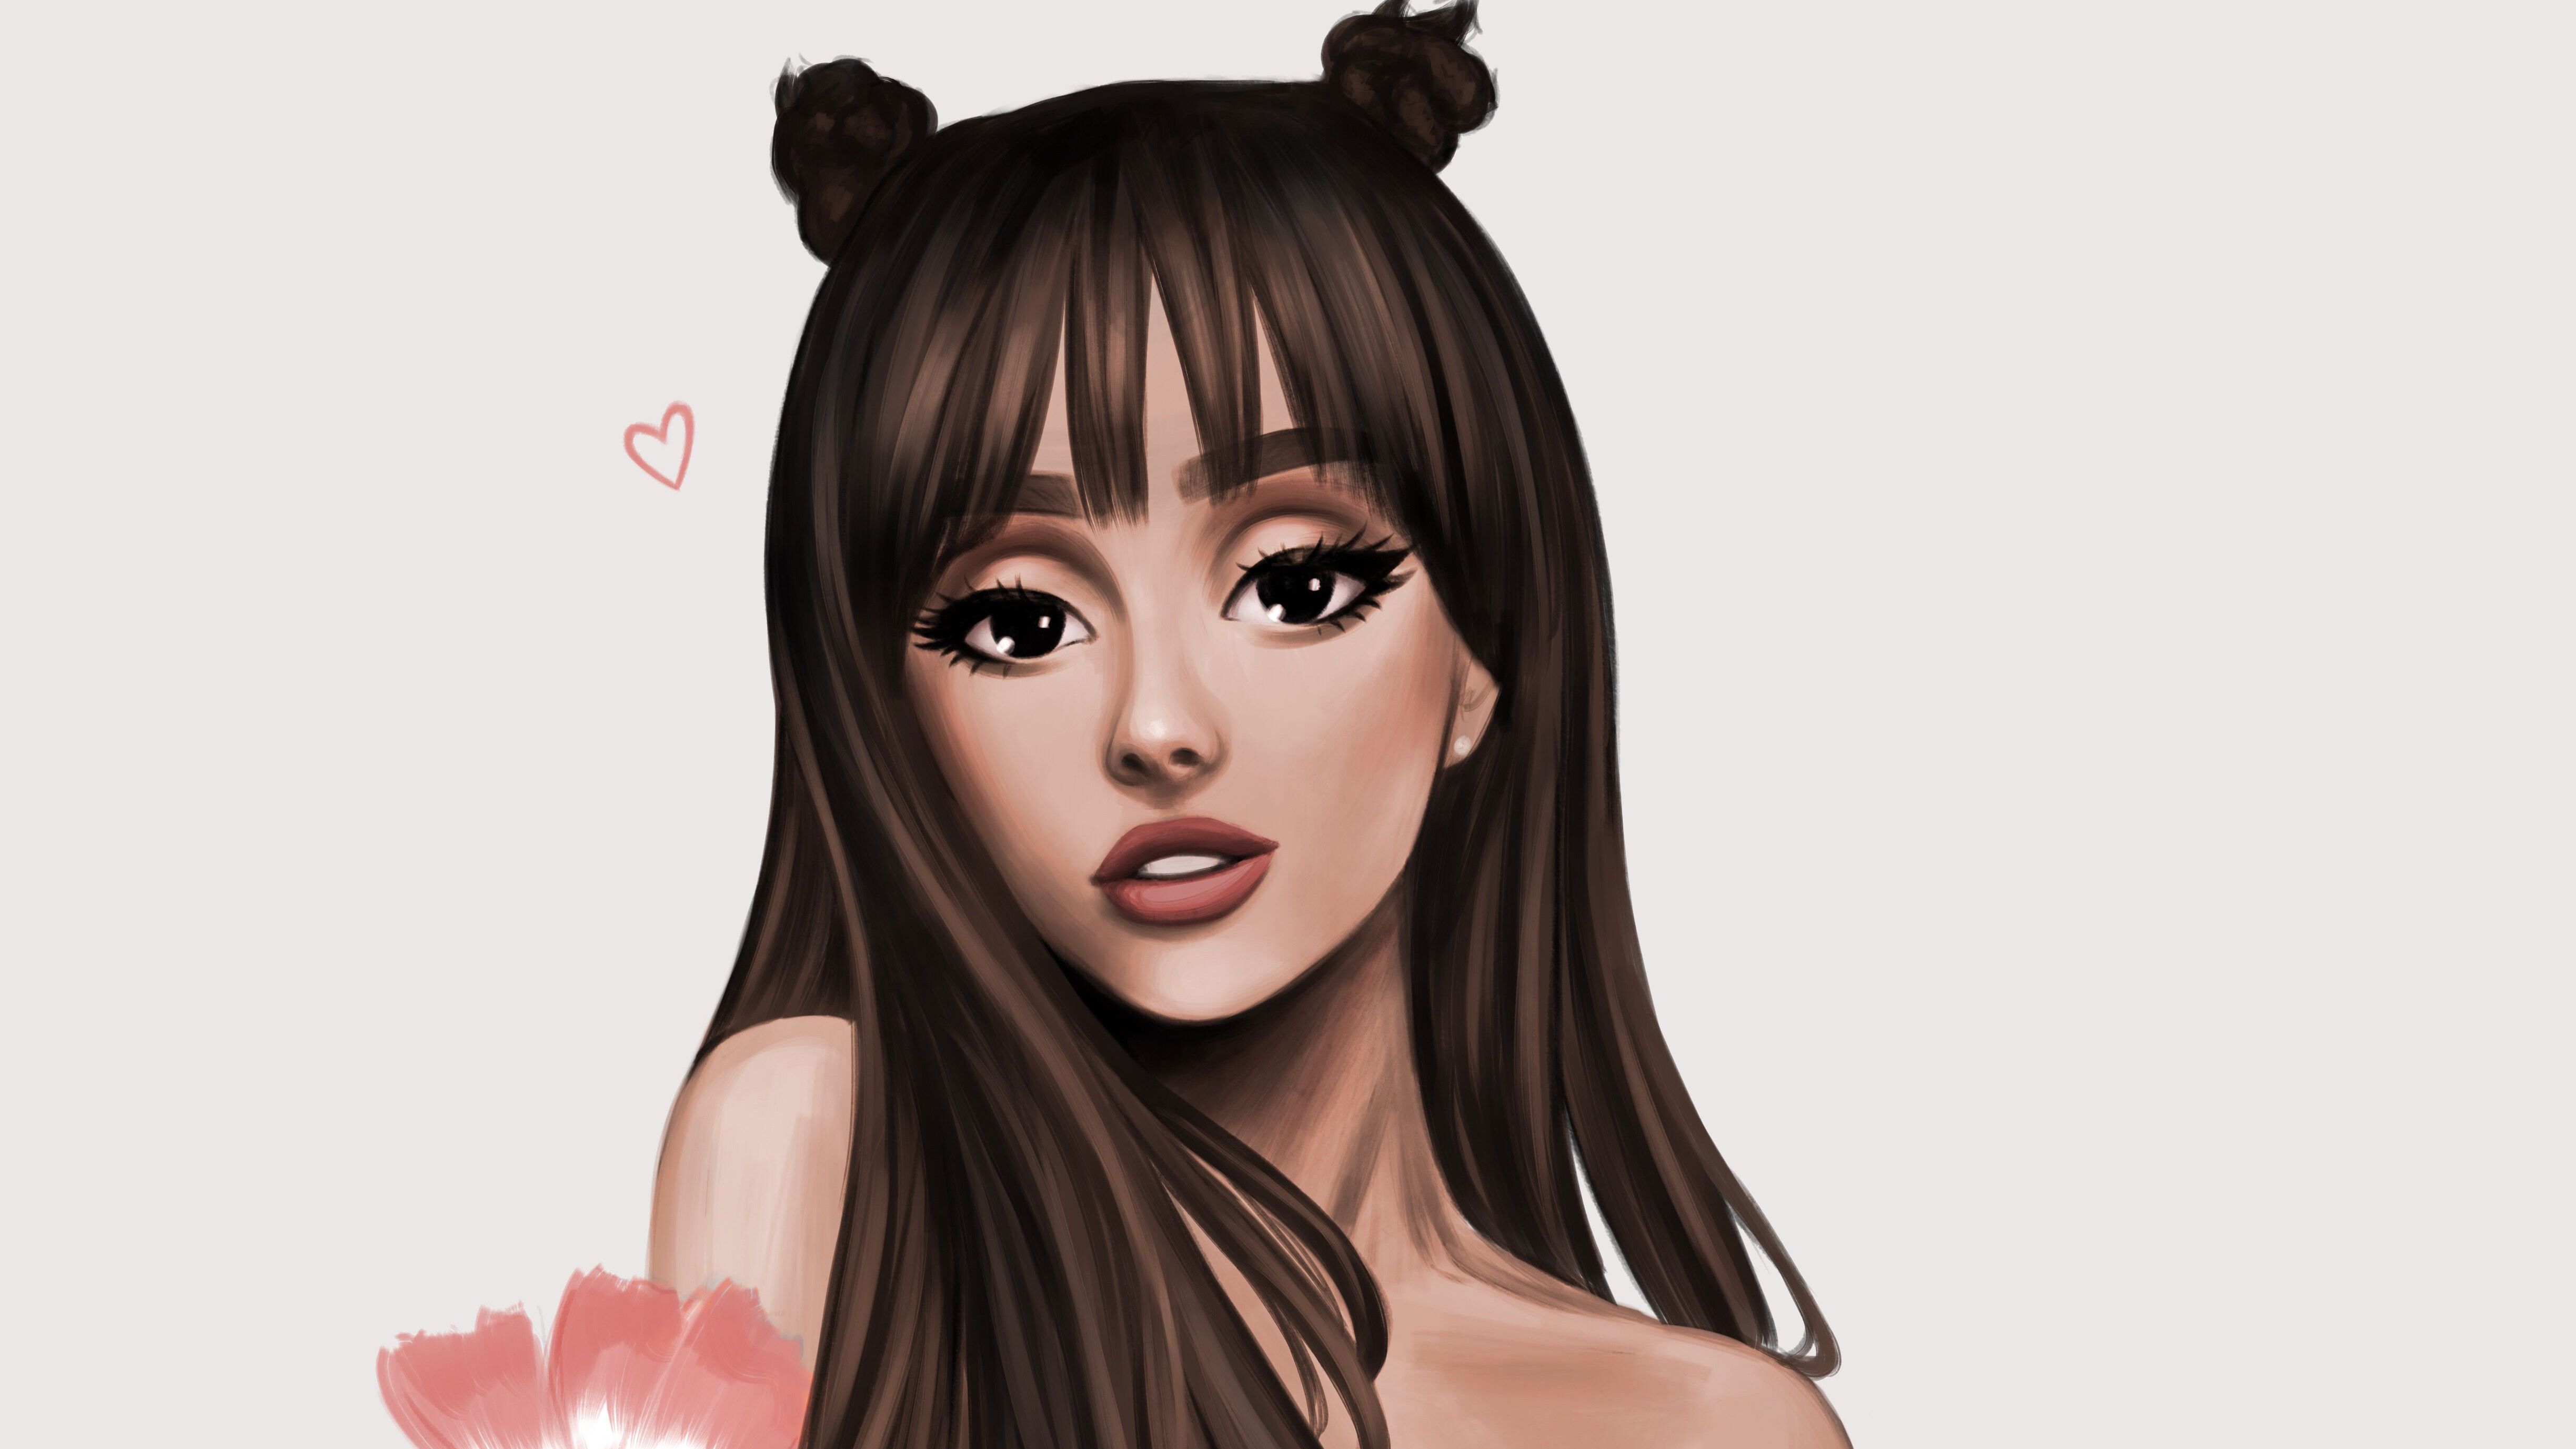 Lexica - ariana grande as a very cute anime toy character